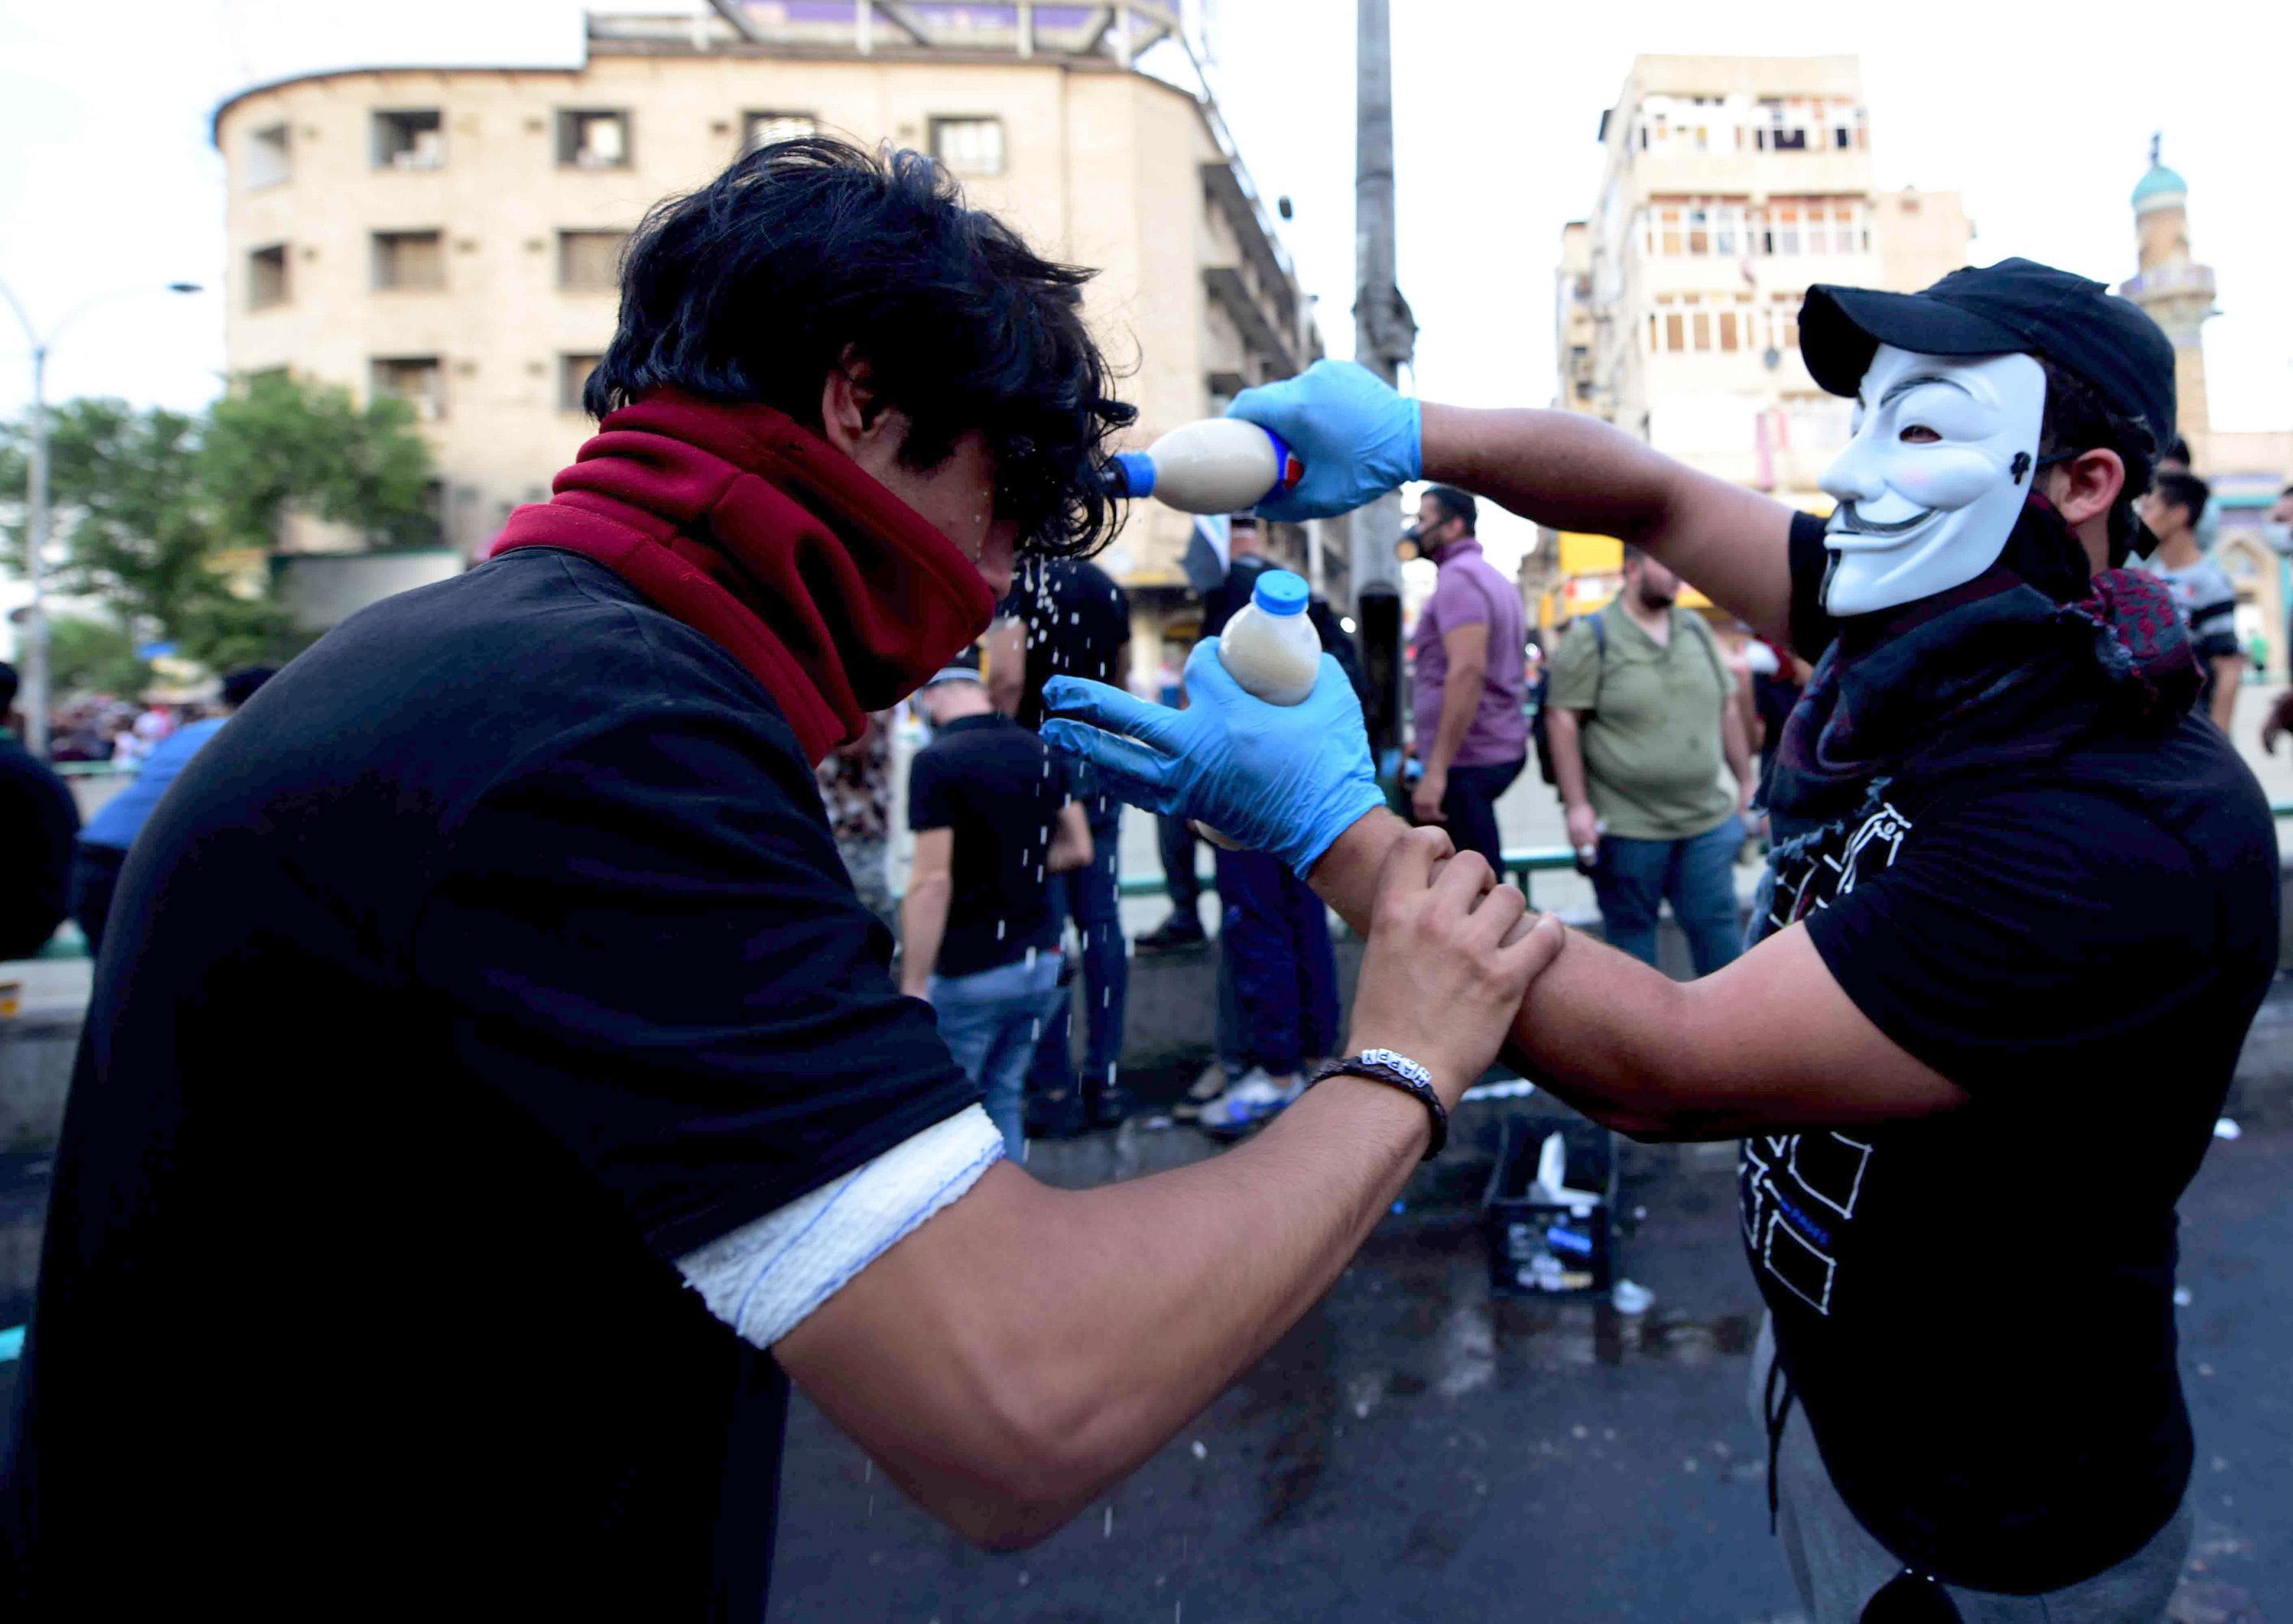 epa07954346 An Iraqi protester wearing mask helps a man after being affected by tear gas, which was dispensed by riot police during clashes with  protesters at al-Tahrir square, central Baghdad, Iraq, 27 October 2019. According to media reports, at least 63 people died during three days of violent clashes between security forces and people protesting against the government in Baghdad and southern Iraqi cities.  EPA/MURTAJA LATEEF